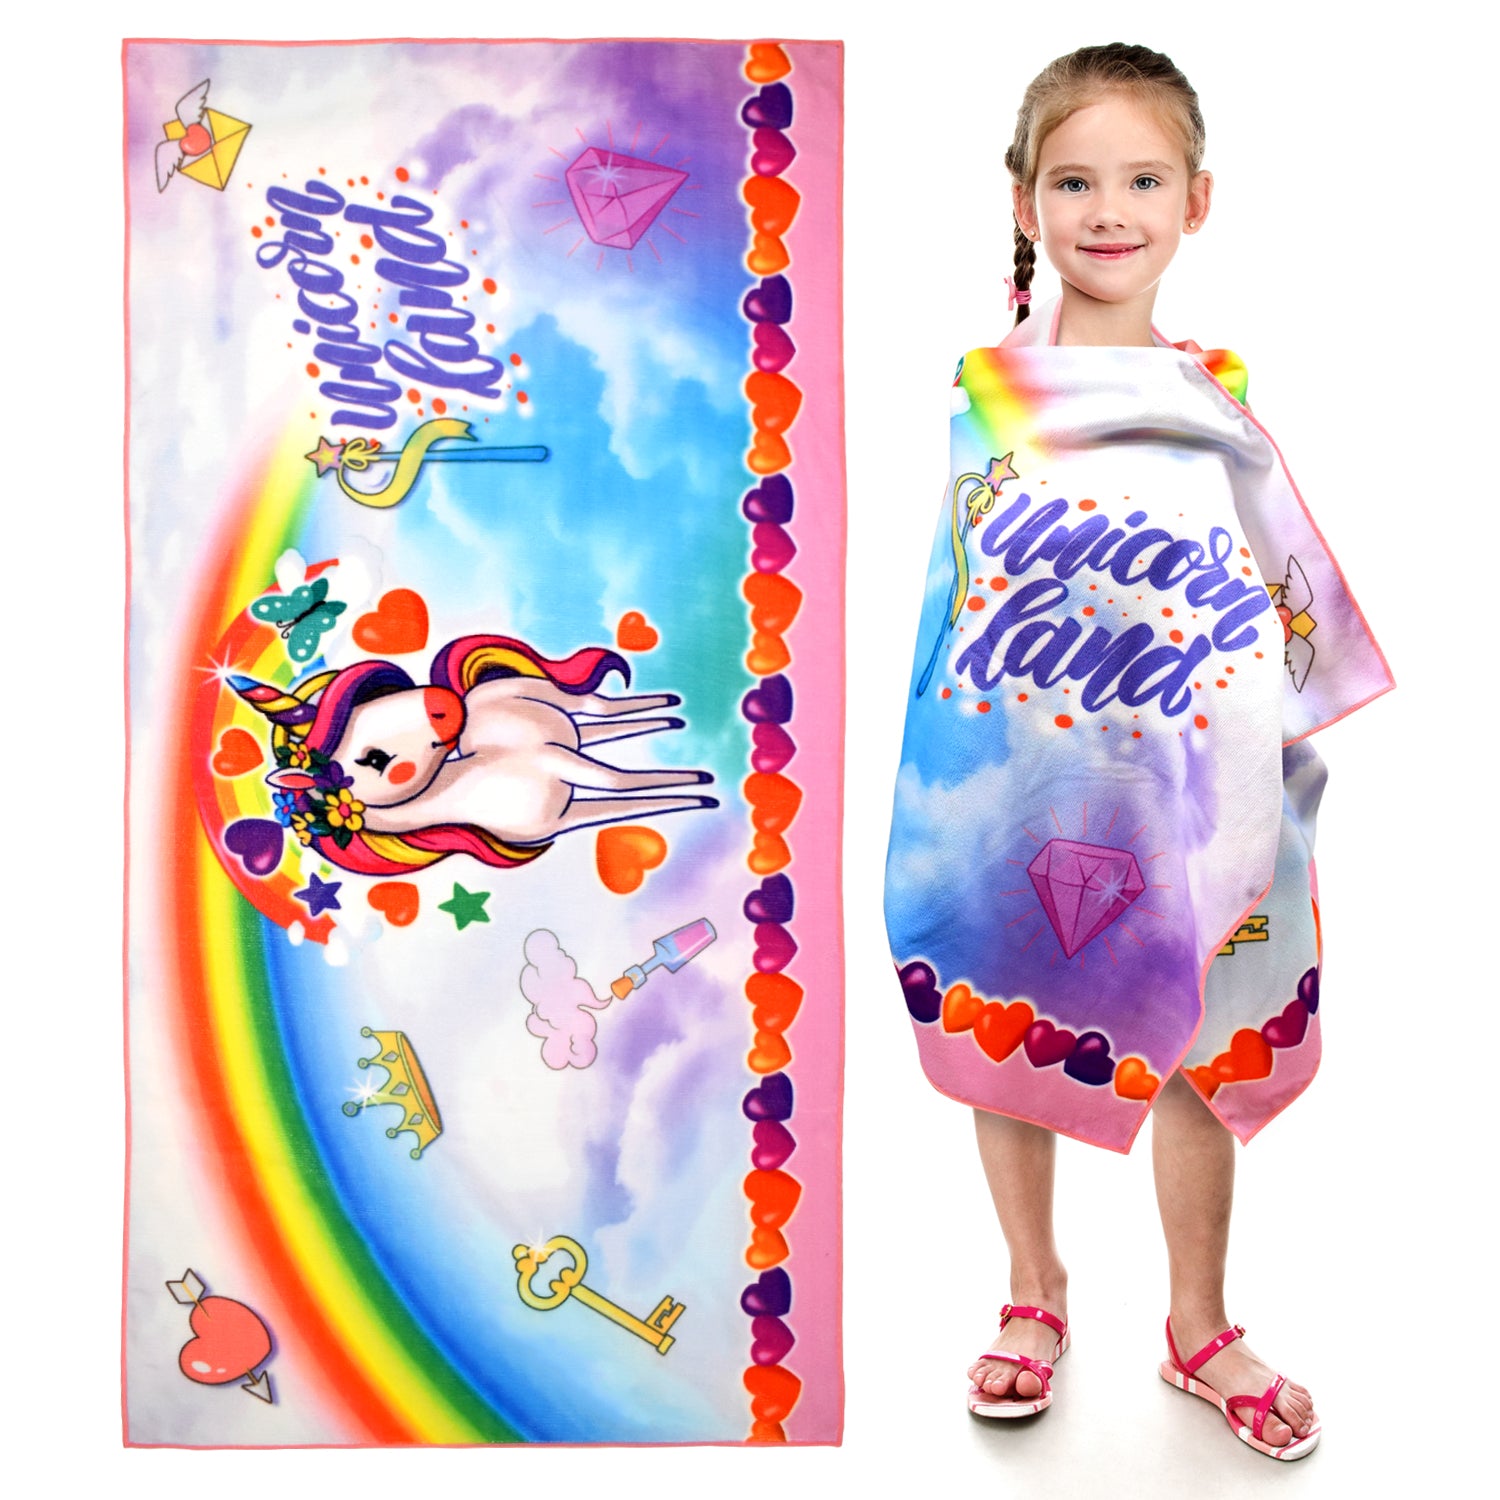 Beach Towel - Microfiber Beach Towels for Kids, Great for Beach, Bath, Swimming, Sports, Camping, Quick Fast Dry Sand Proof Super Soft Breathable and Lightweight Beach Towel (Unicorn, Towel)